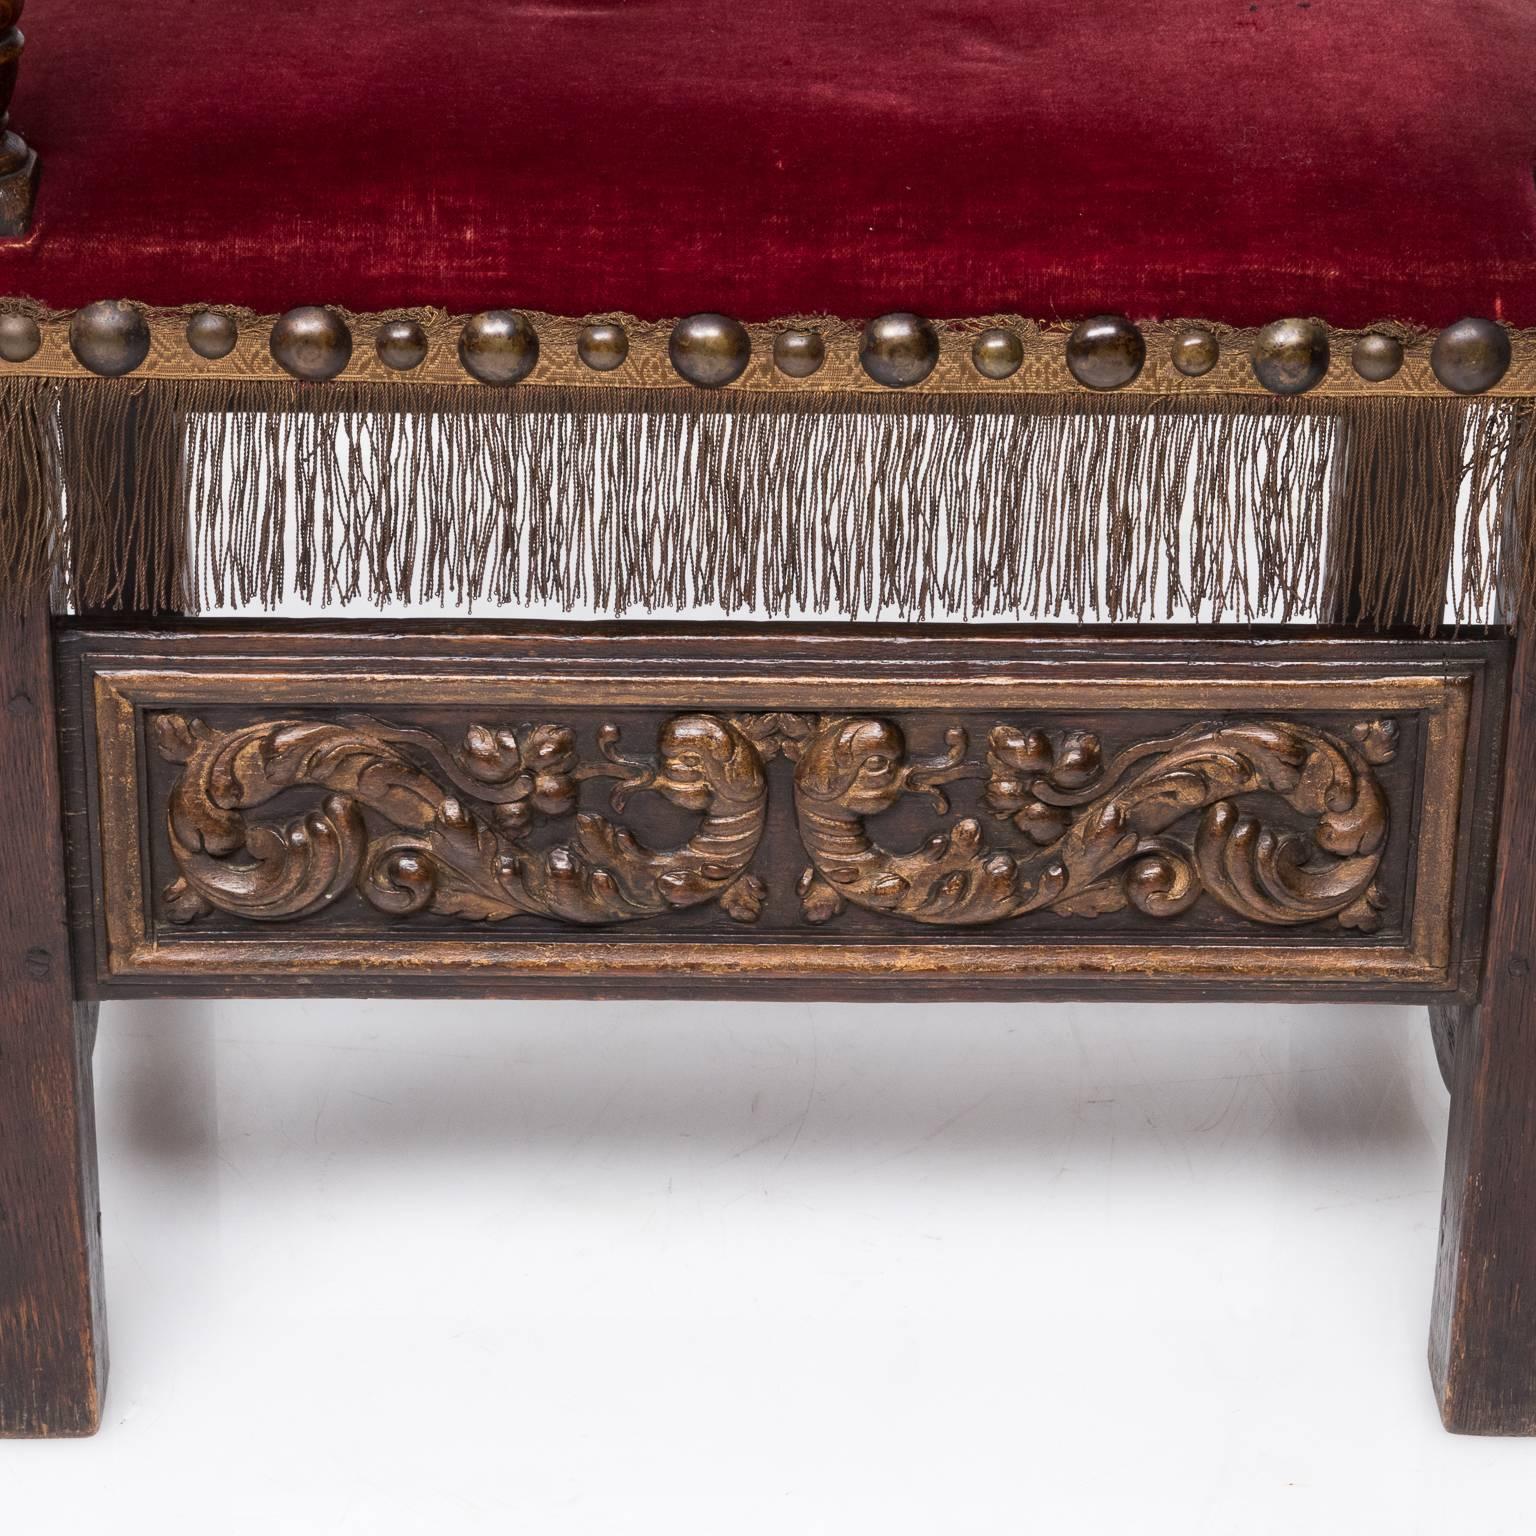 Pair of carved 19th century French Renaissance armchairs with velvet upholstery-upholstery has silk embroidered crests-these amazing chair are made of oak and are nicely carved they have an H stretcher below and a front panel carving they also have